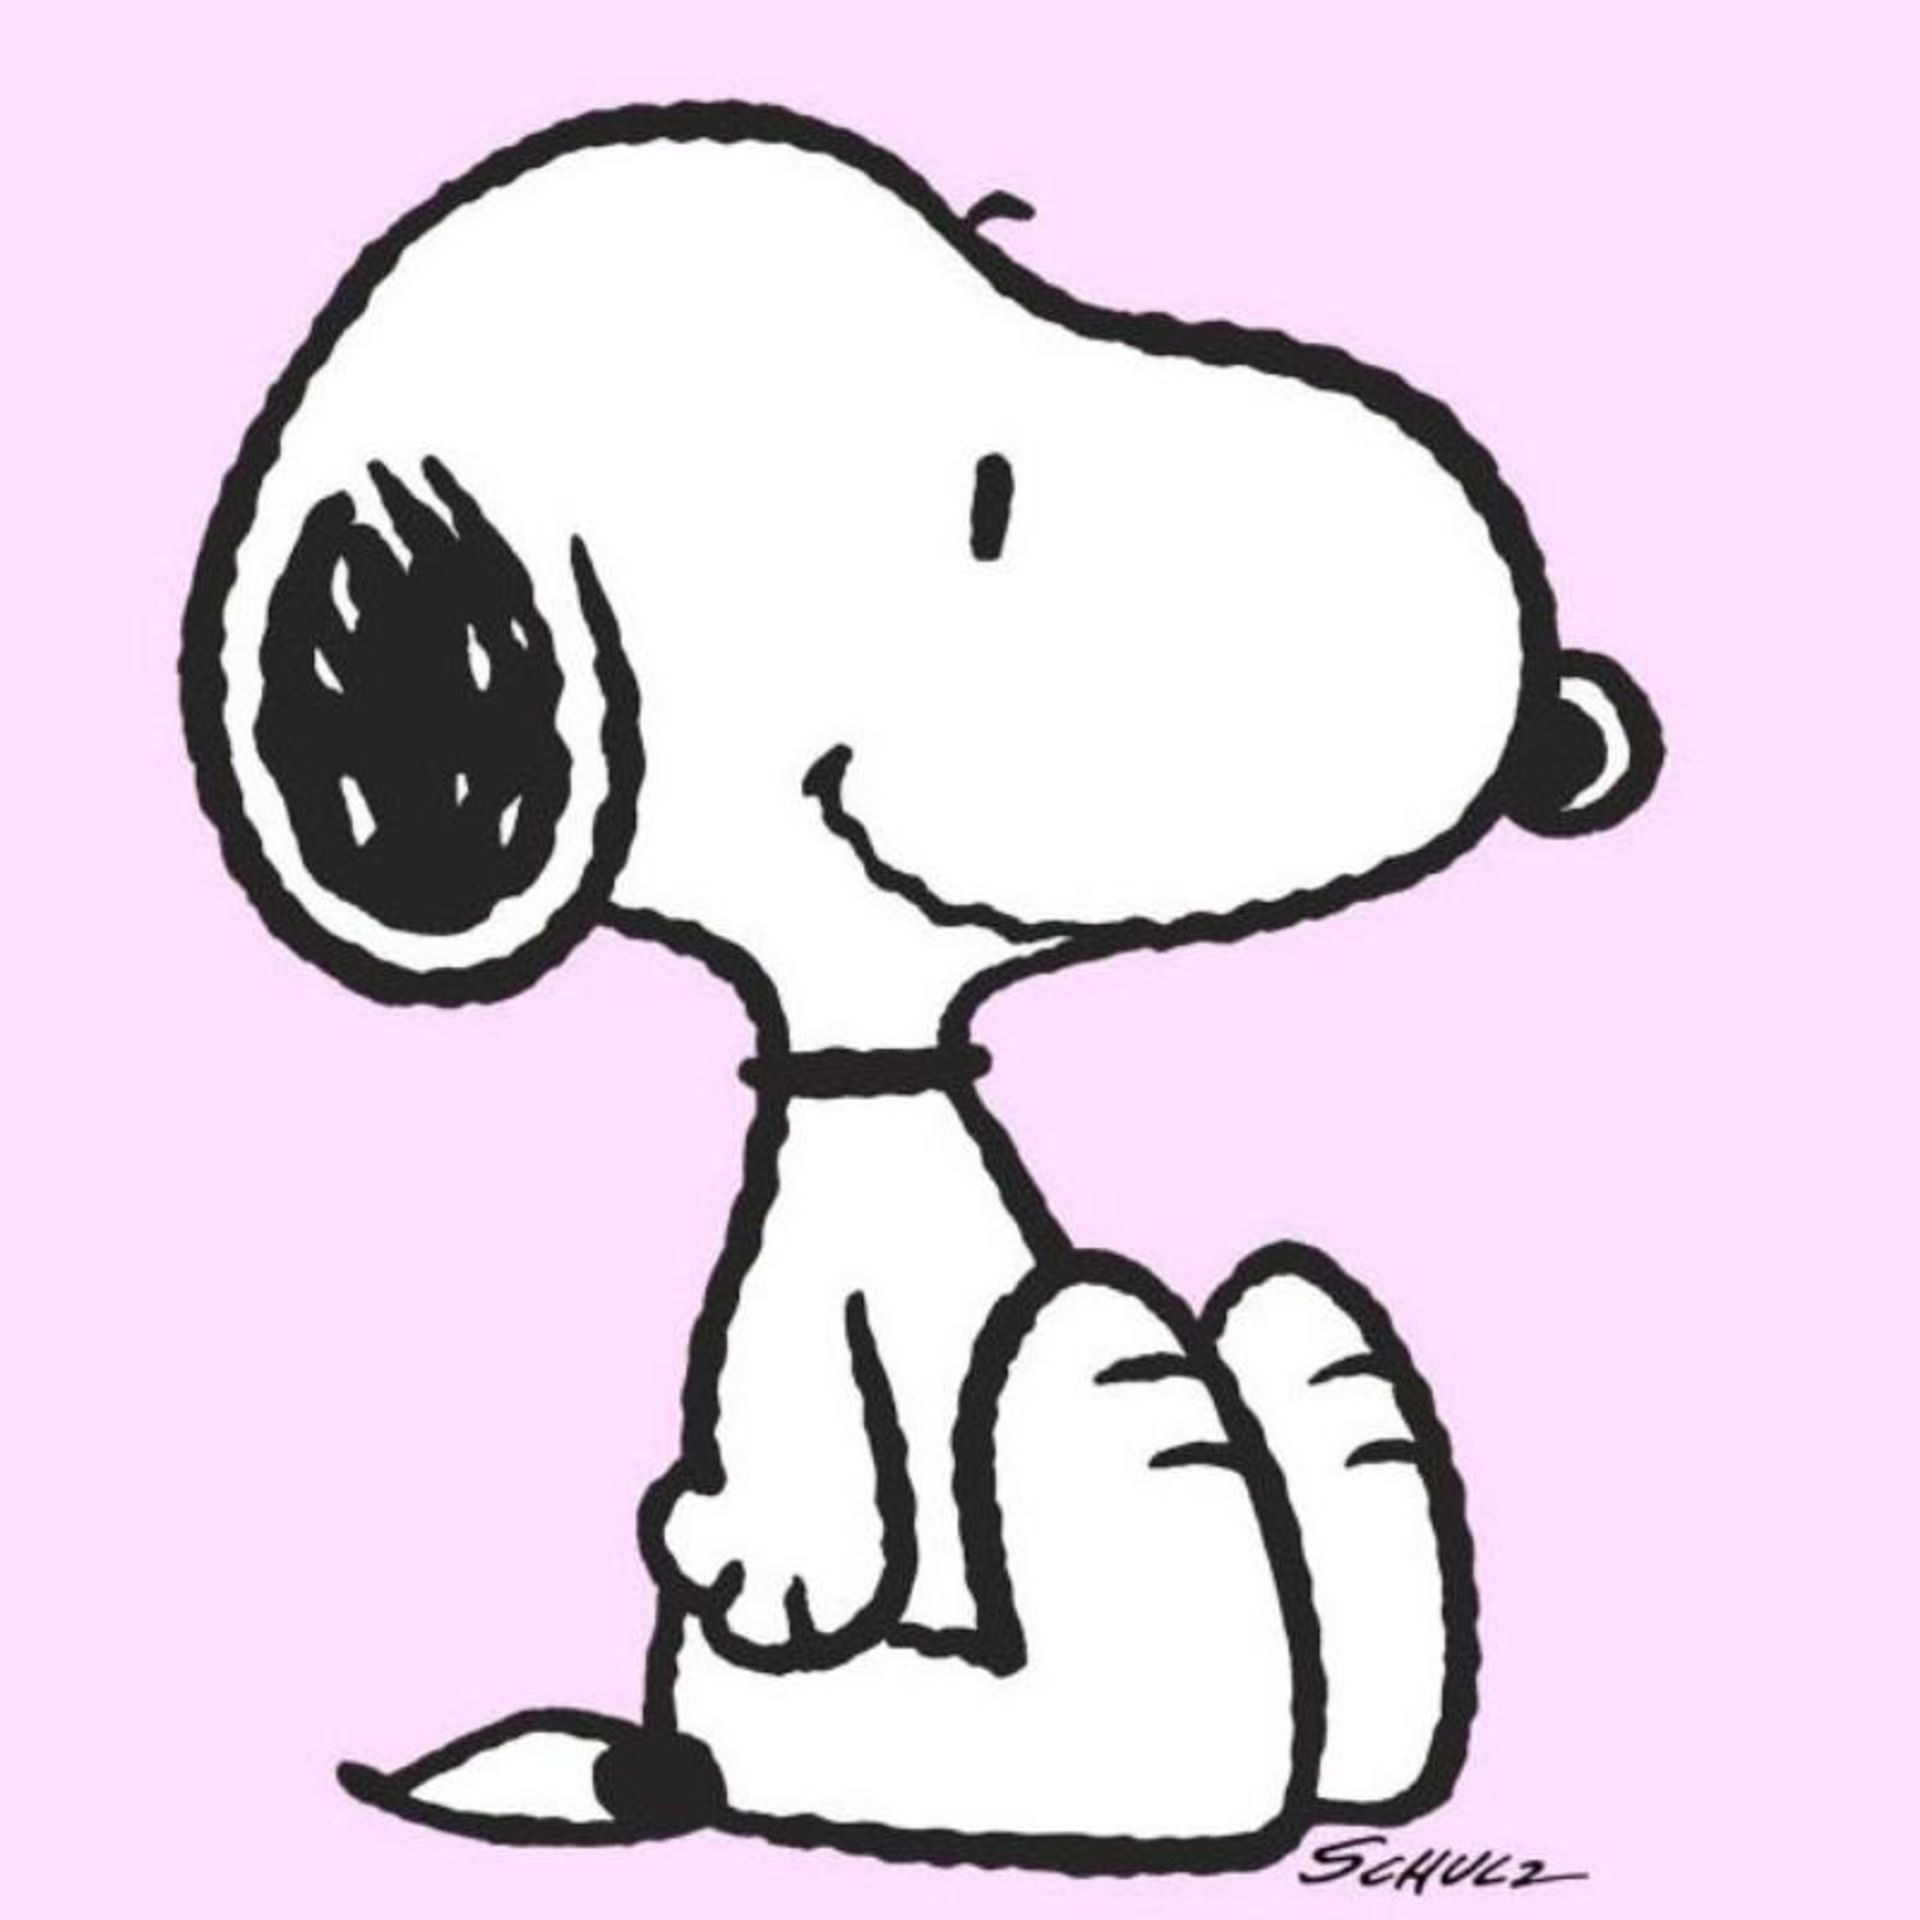 Peanuts, "Snoopy: Pink" Hand Numbered Canvas (40"x44") Limited Edition Fine Art - Image 2 of 2